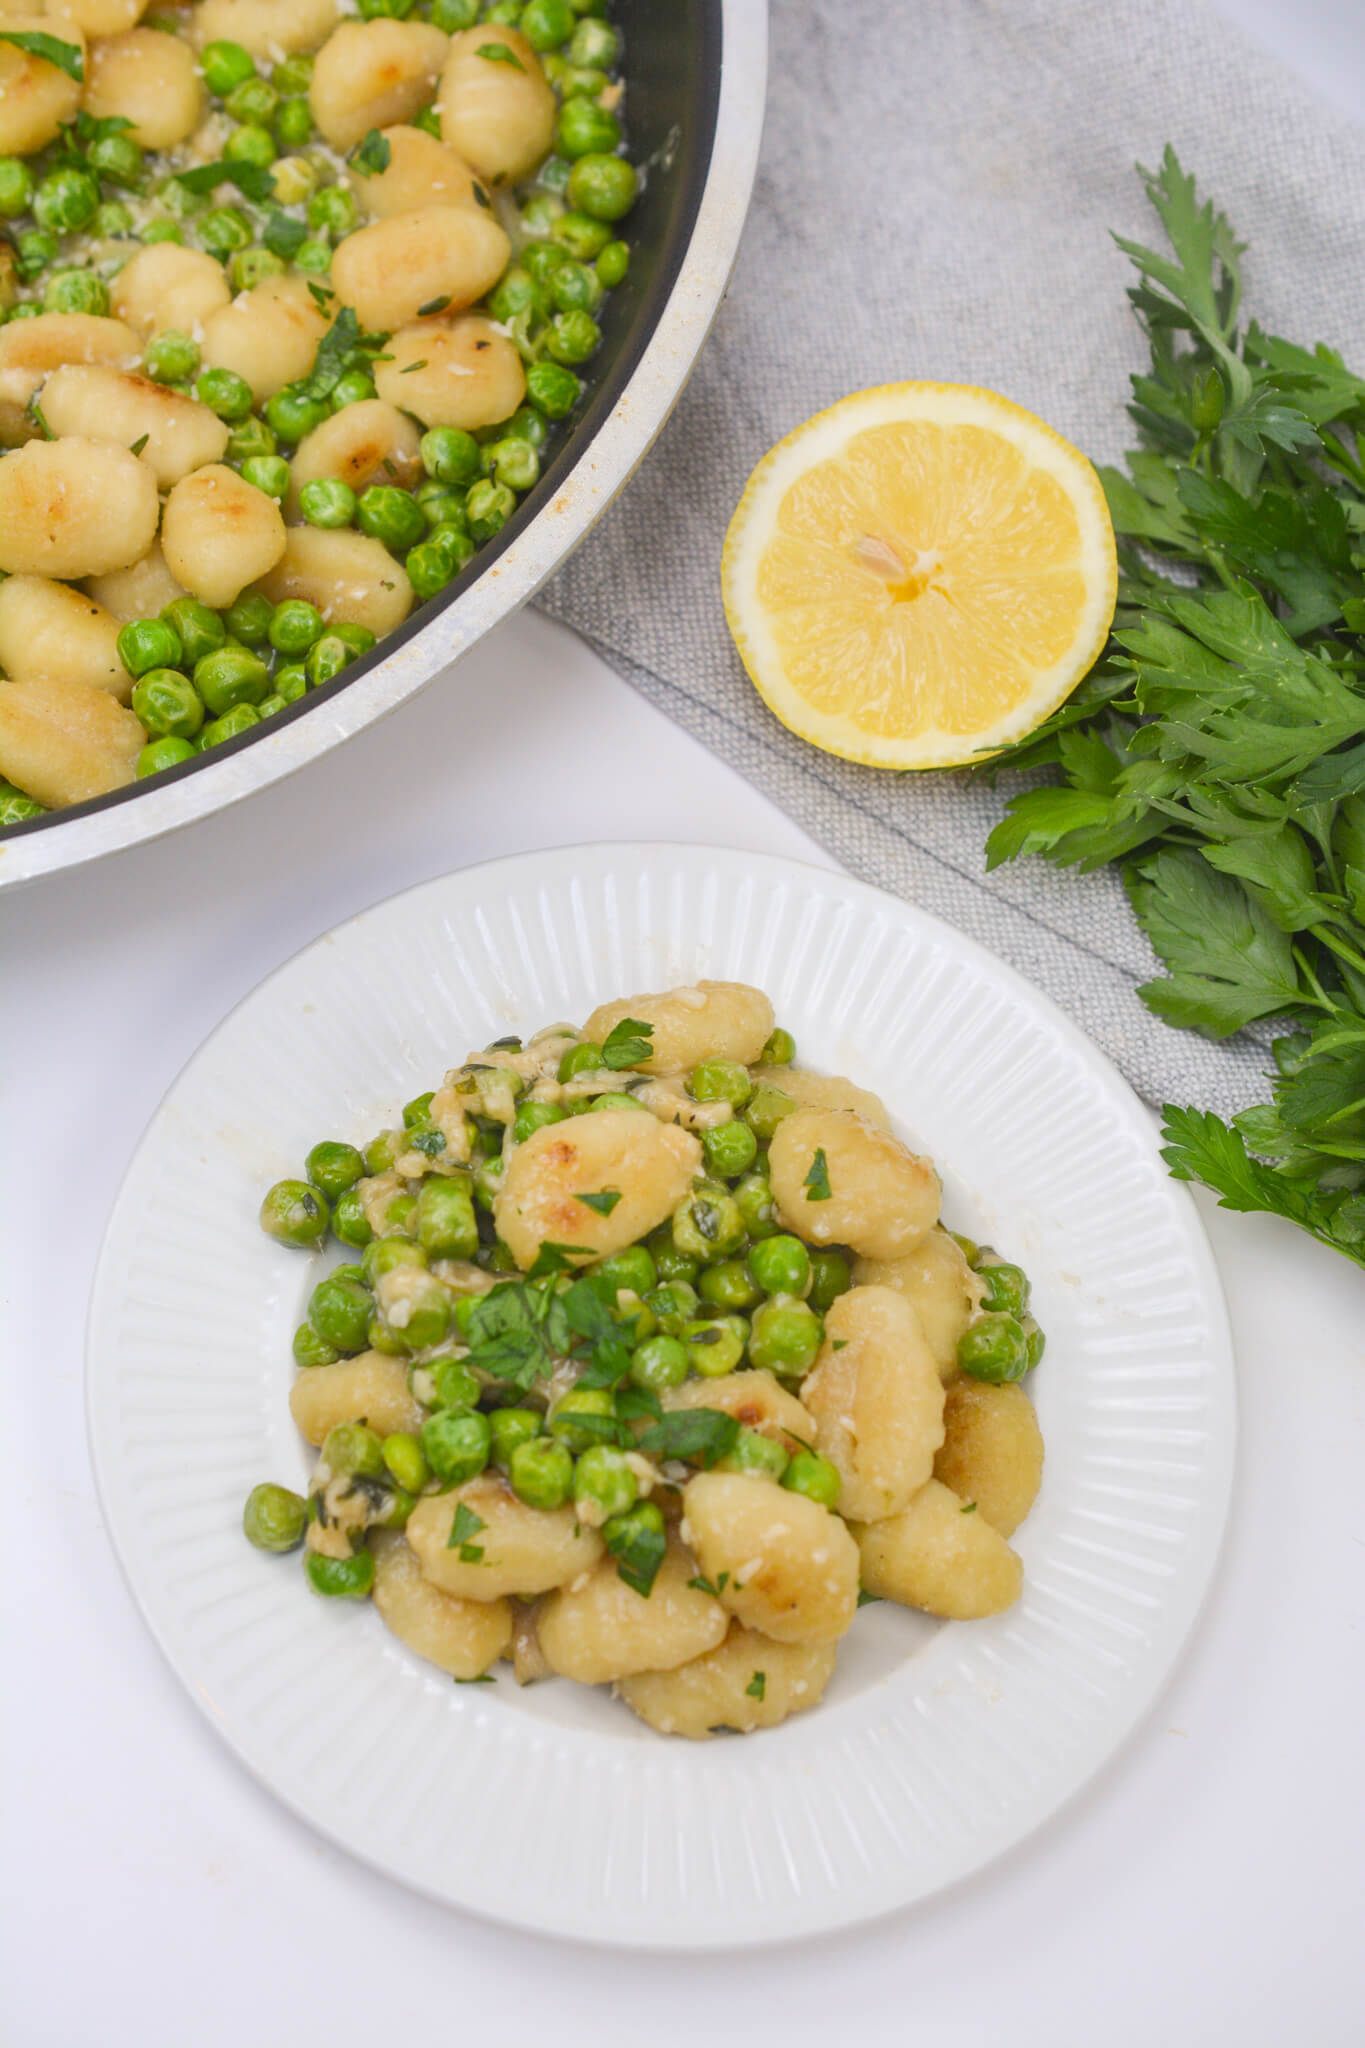 A serving of the gnocchi and a serving dish with the gnocchi with a side of lemon.